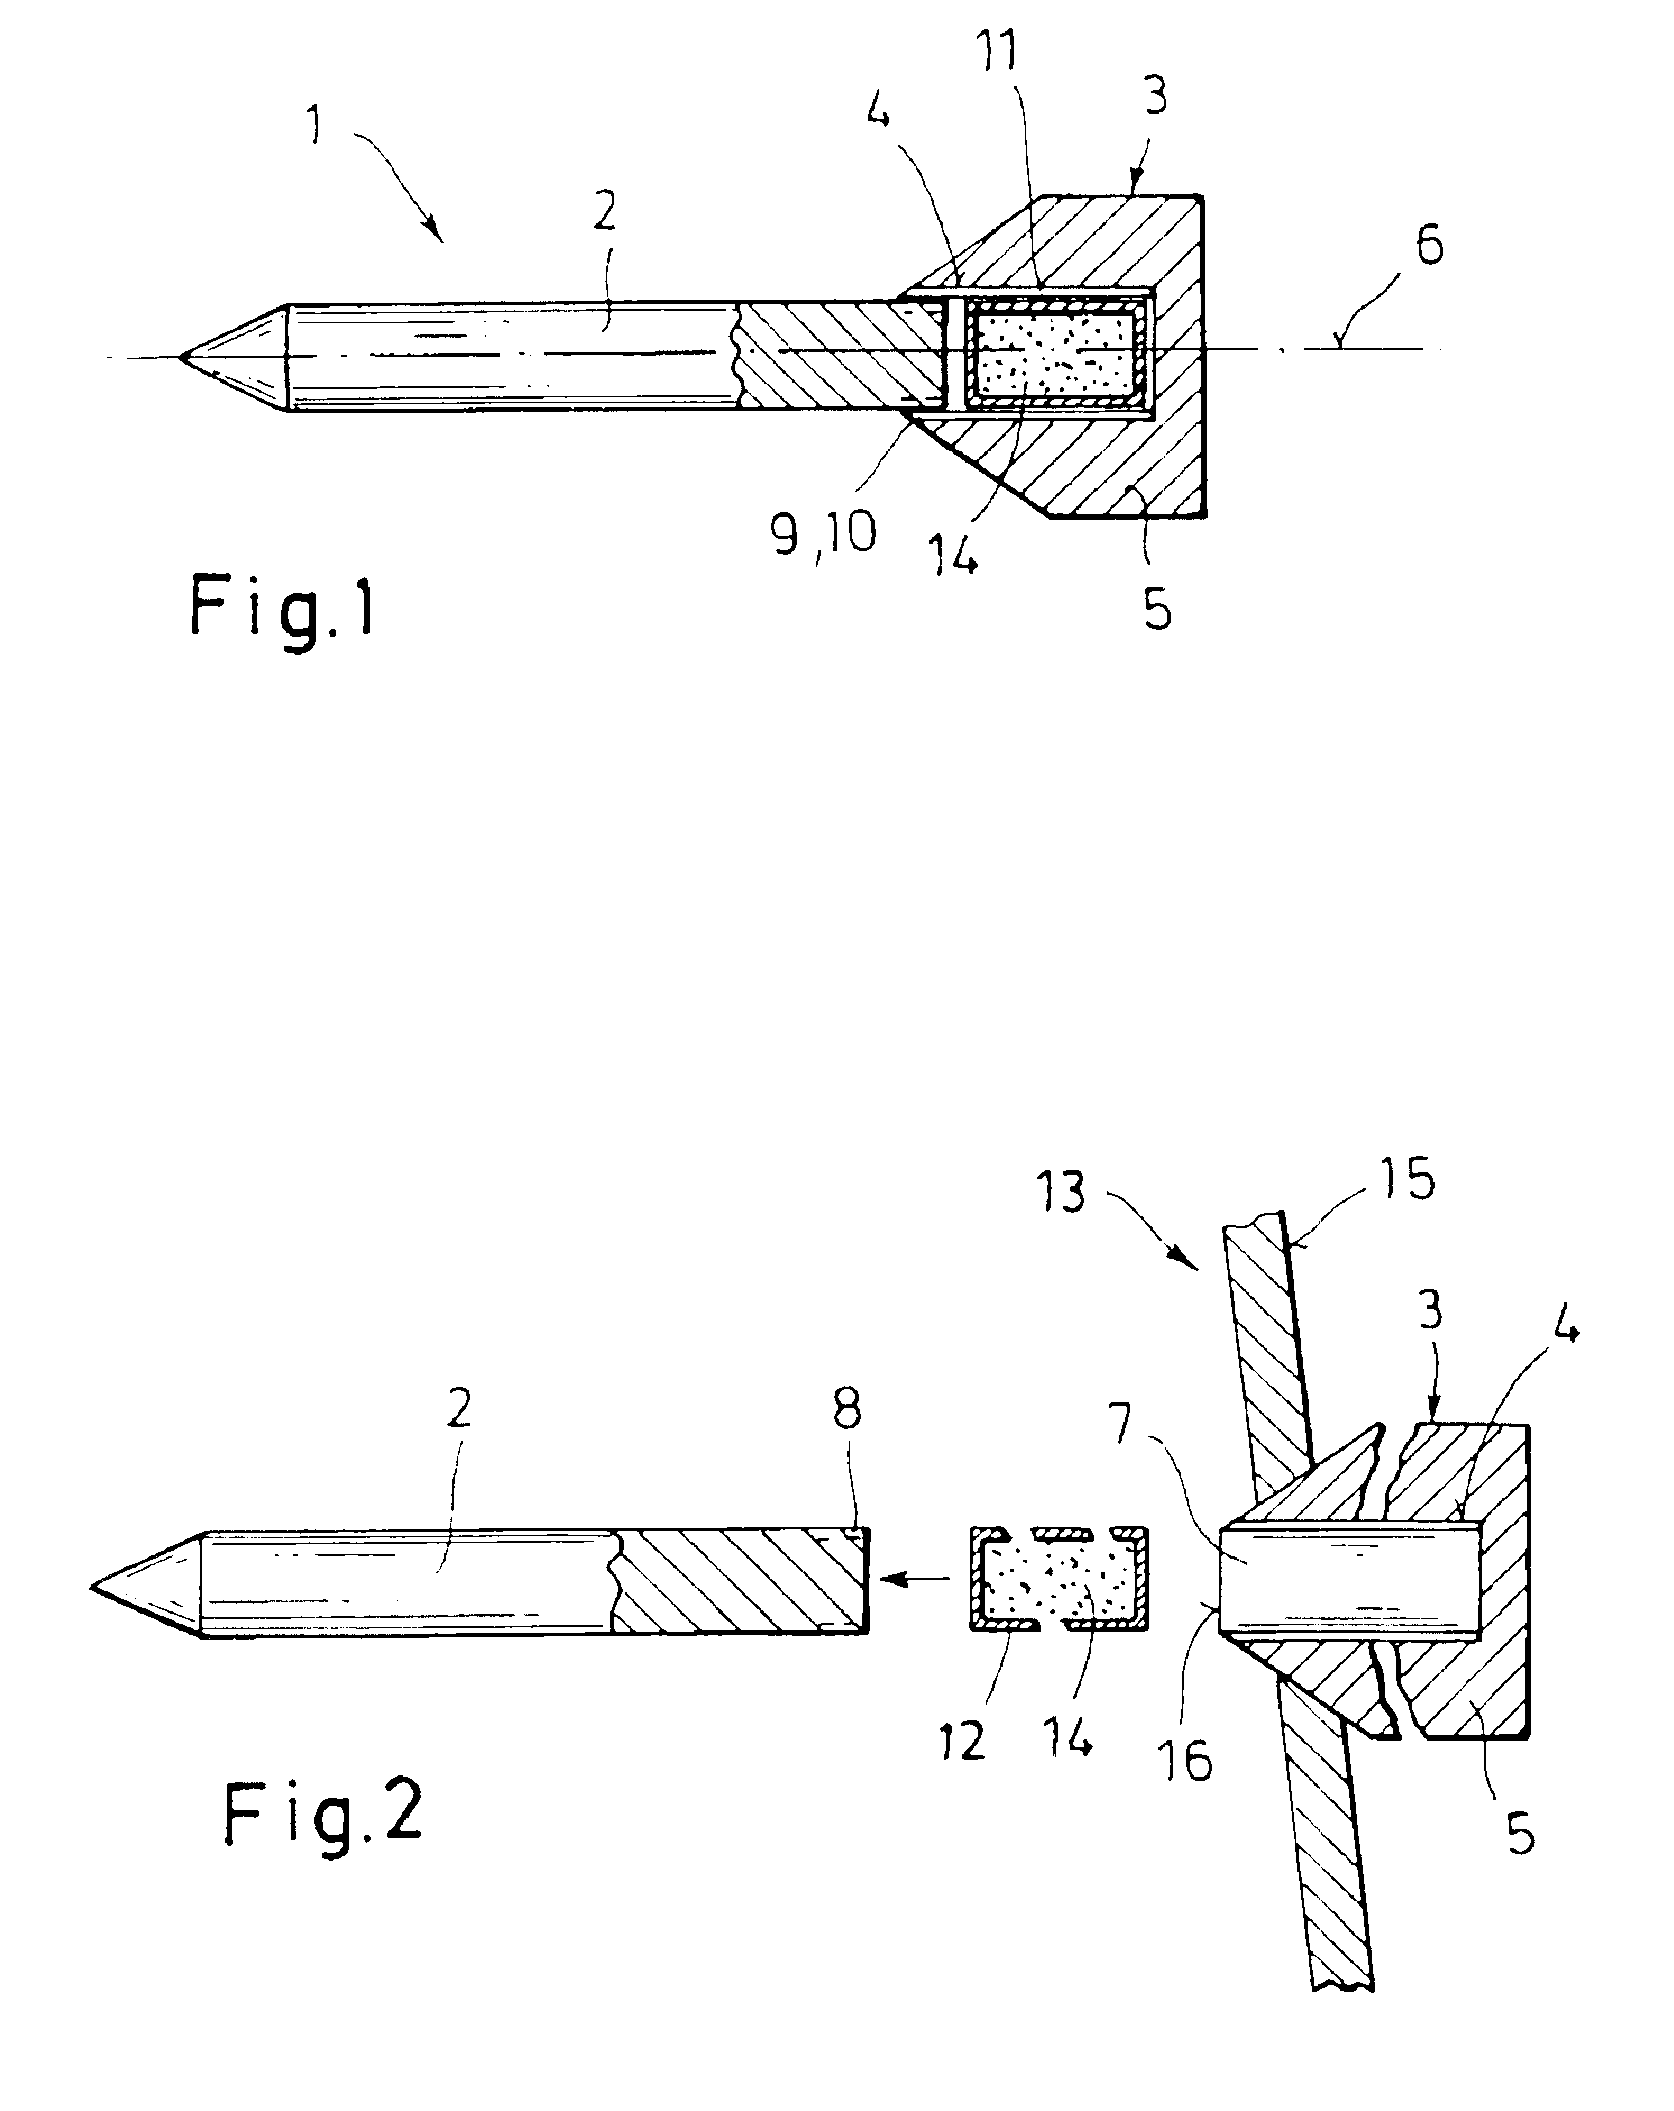 Incendiary composition for a fin-stabilized kinetic energy projectile